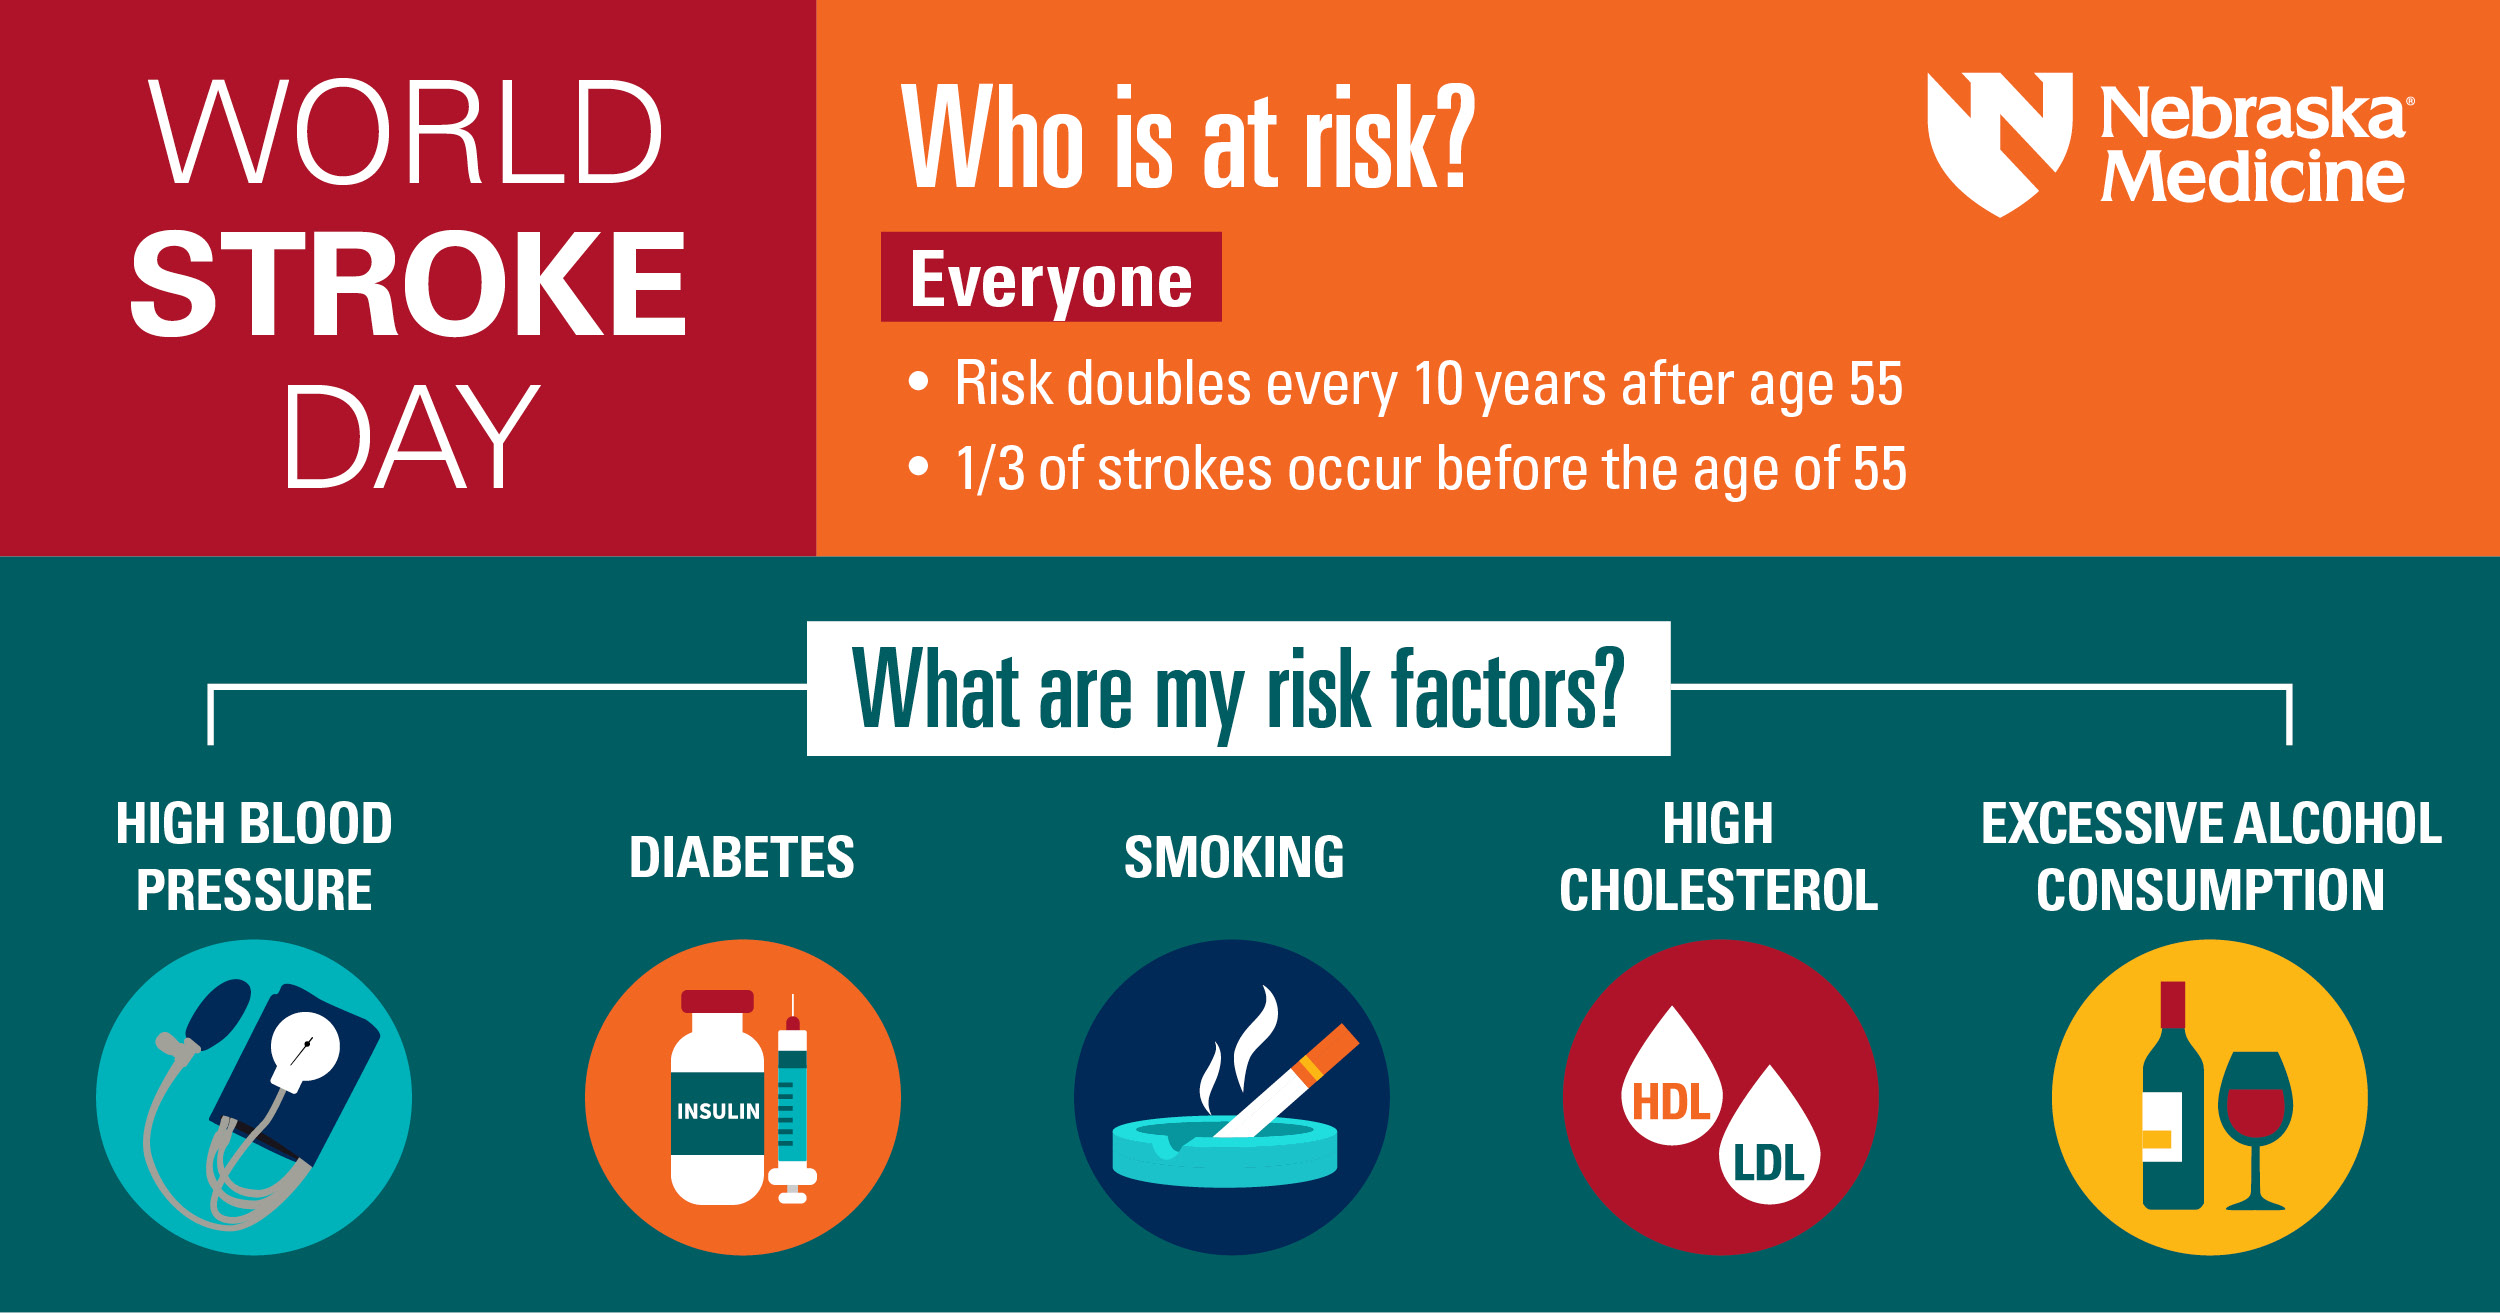  A chart shows risk factors for stroke including high blood pressure, diabetes, smoking, high cholesterol, and excessive alcohol consumption.